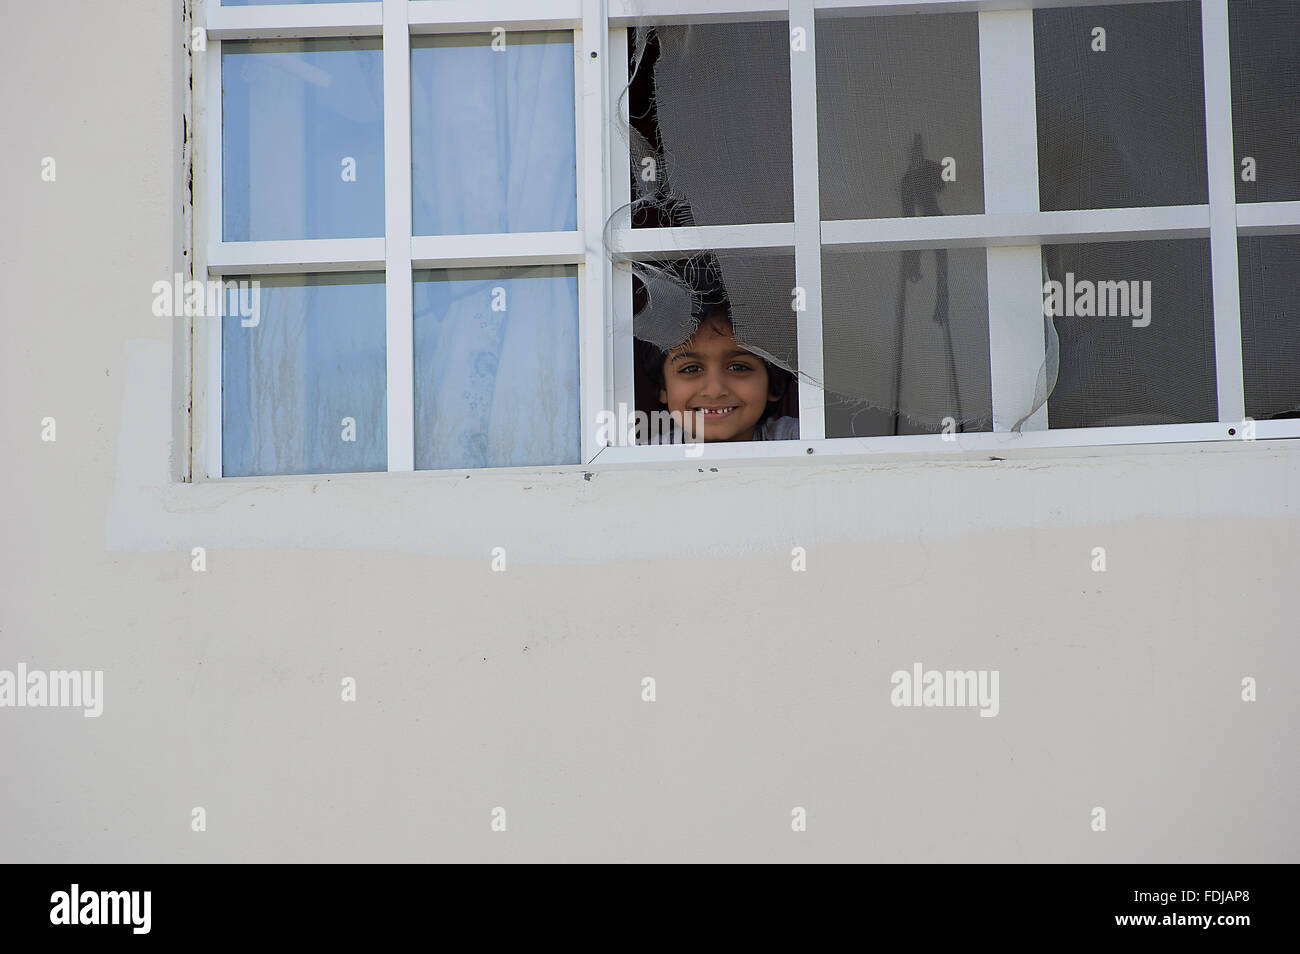 A child in Muscat, Oman smiling with a gap in his teeth and looking out of a broken window through a torn screen Stock Photo